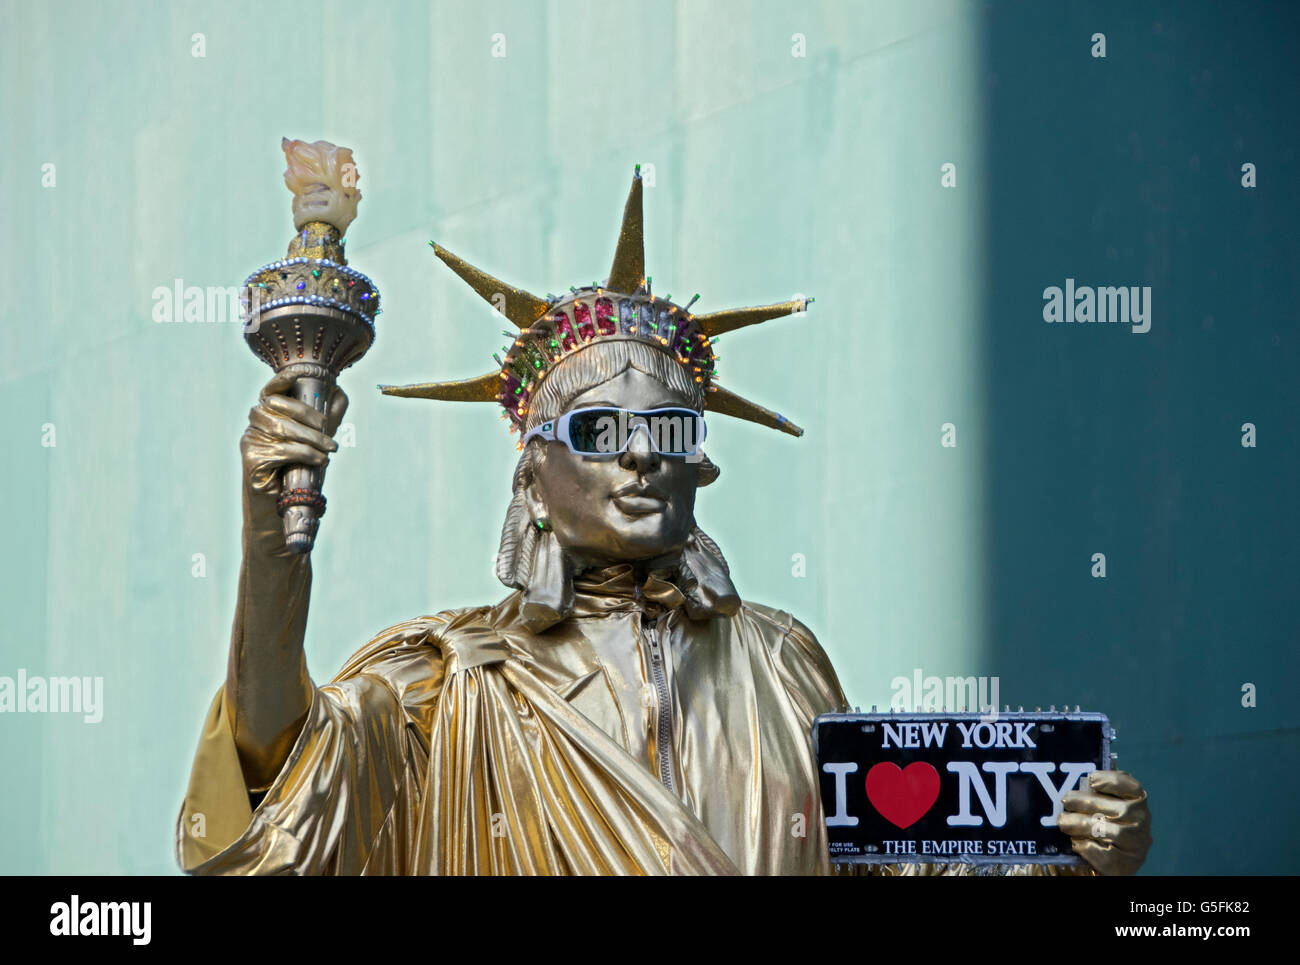 A Statue if Liberty Character busker in Times Square holding an I LOVE NEW YORK sign. Stock Photo